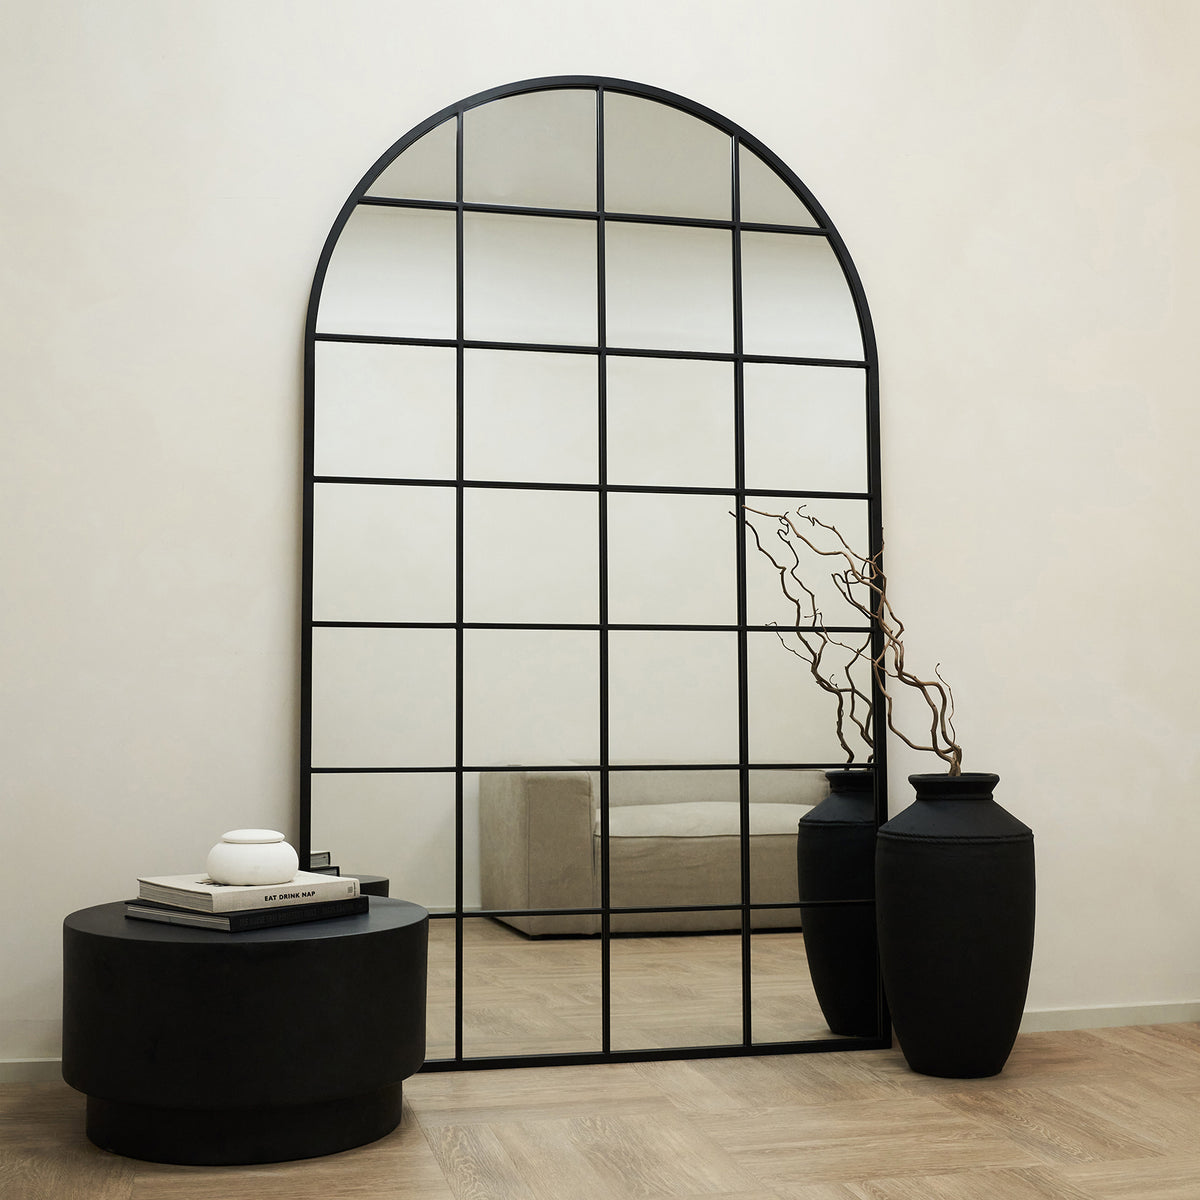 Full Length Extra Large Black Arched Metal Window Mirror leaning against wall